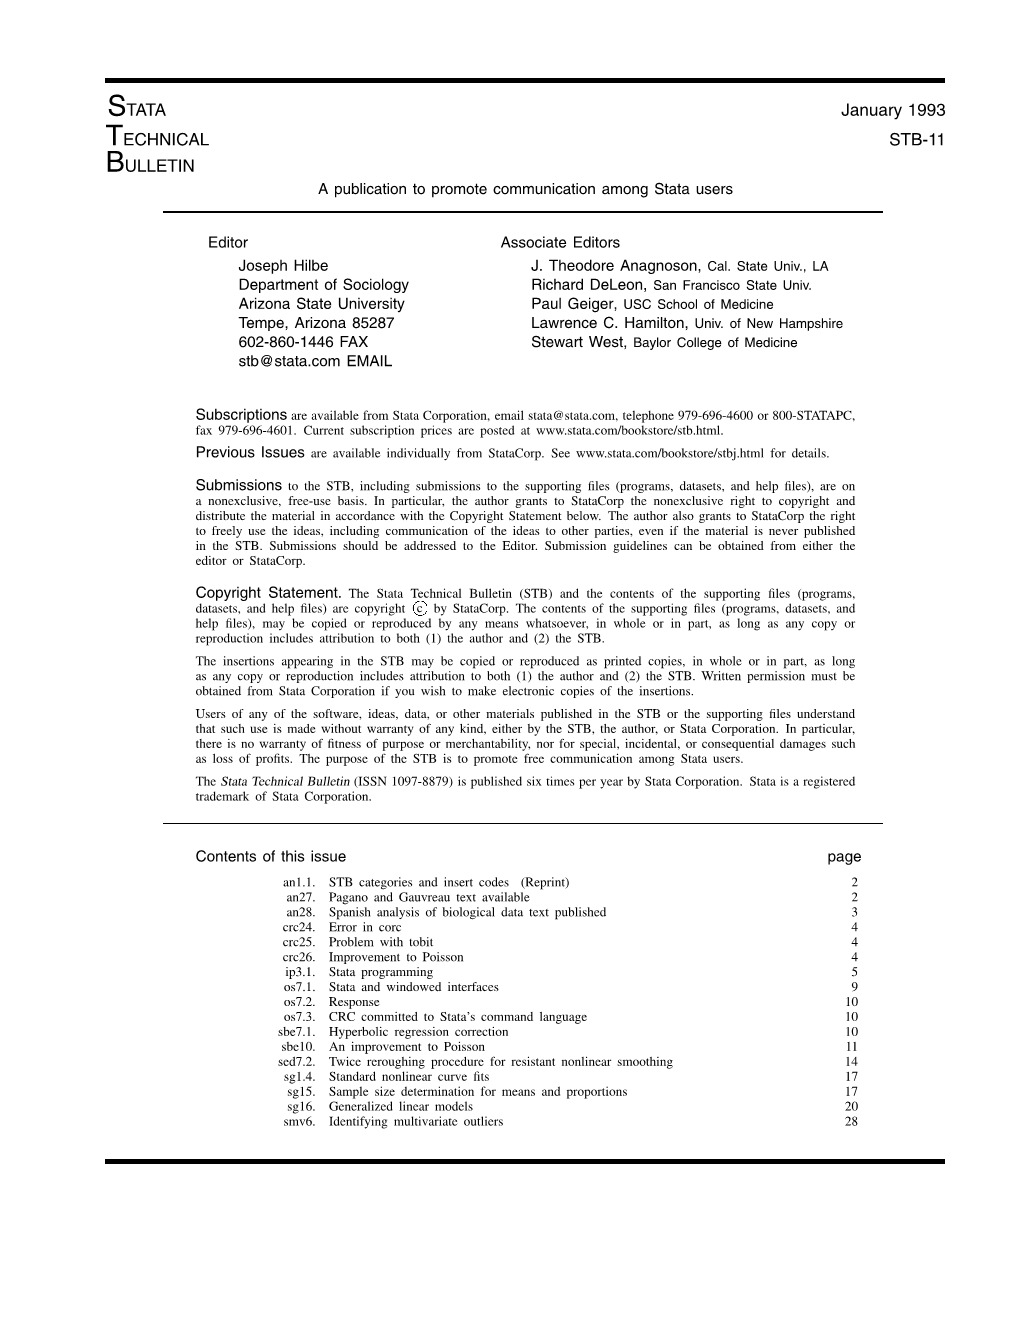 STATA January 1993 TECHNICAL STB-11 BULLETIN a Publication to Promote Communication Among Stata Users